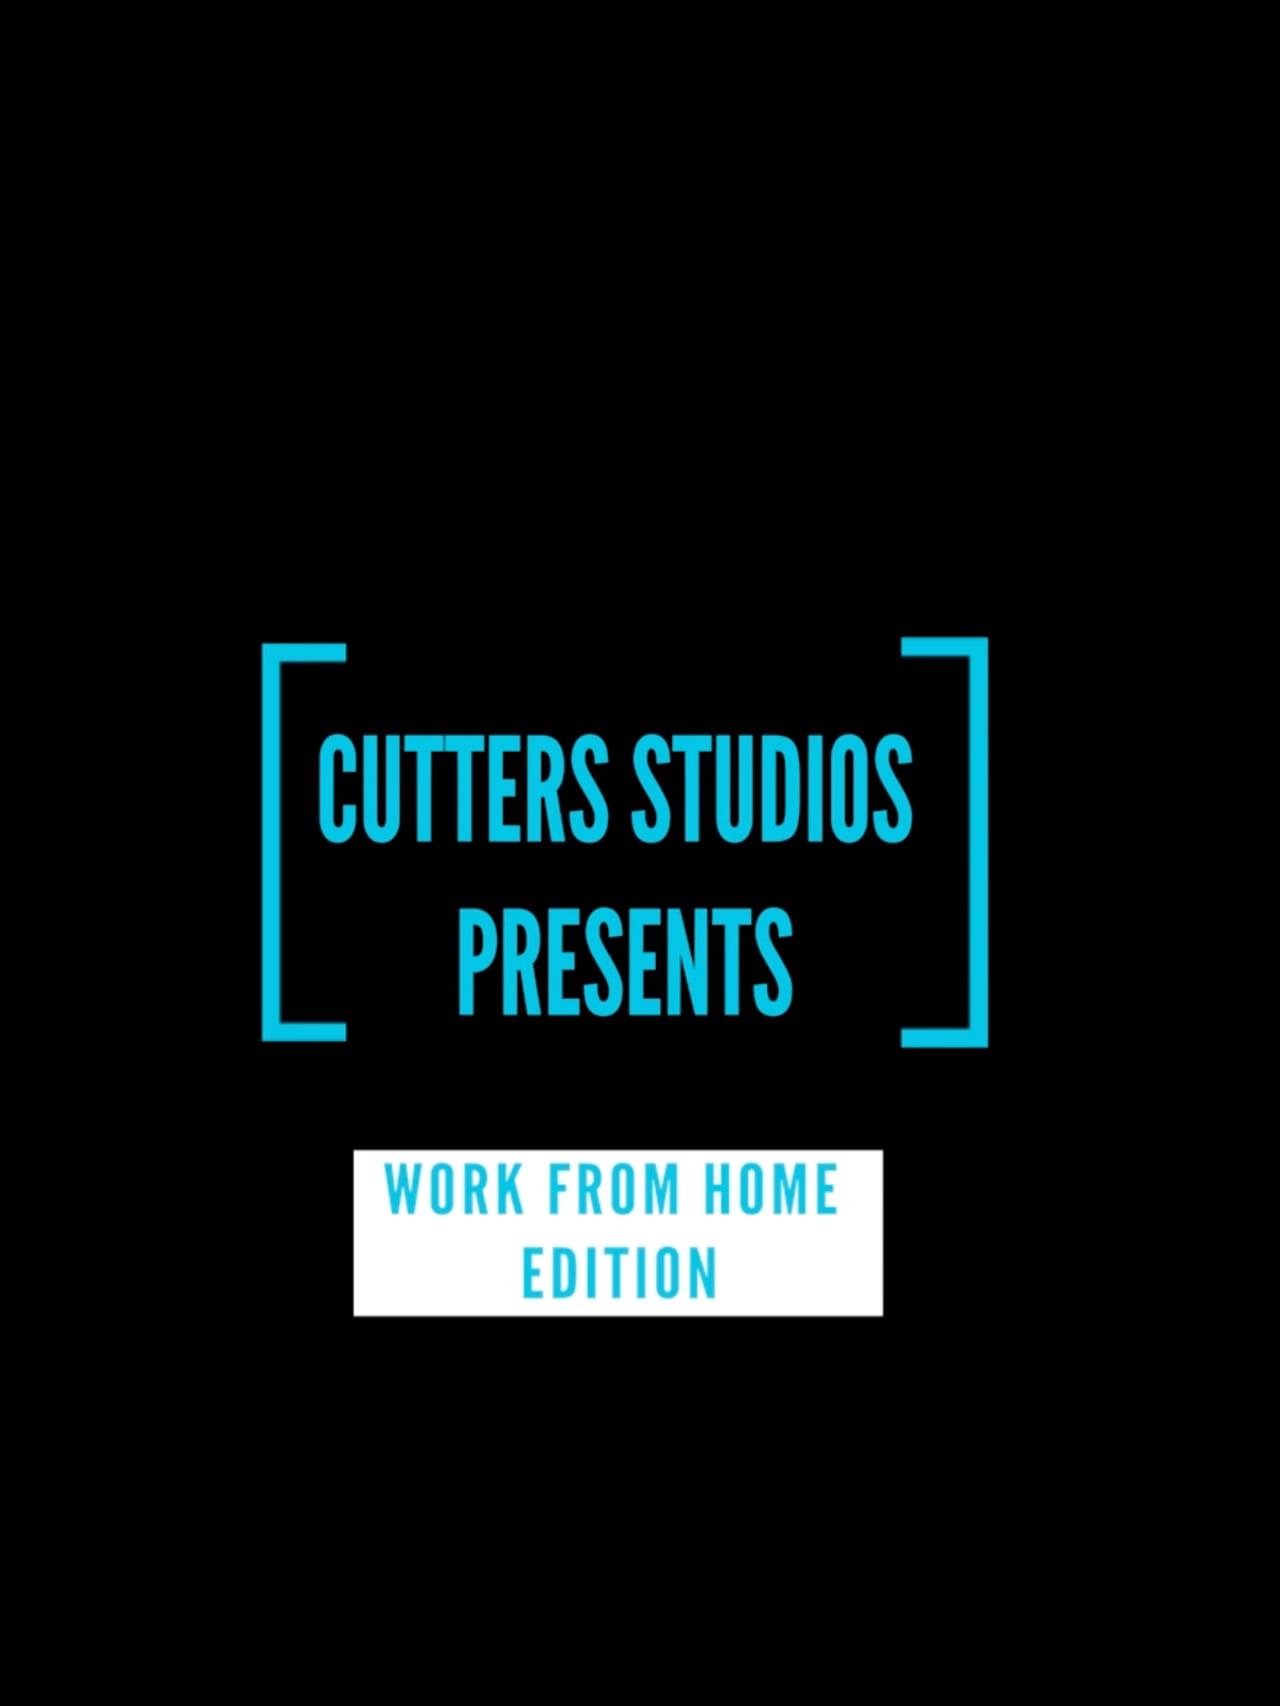 cutters studios presents | work from home edition